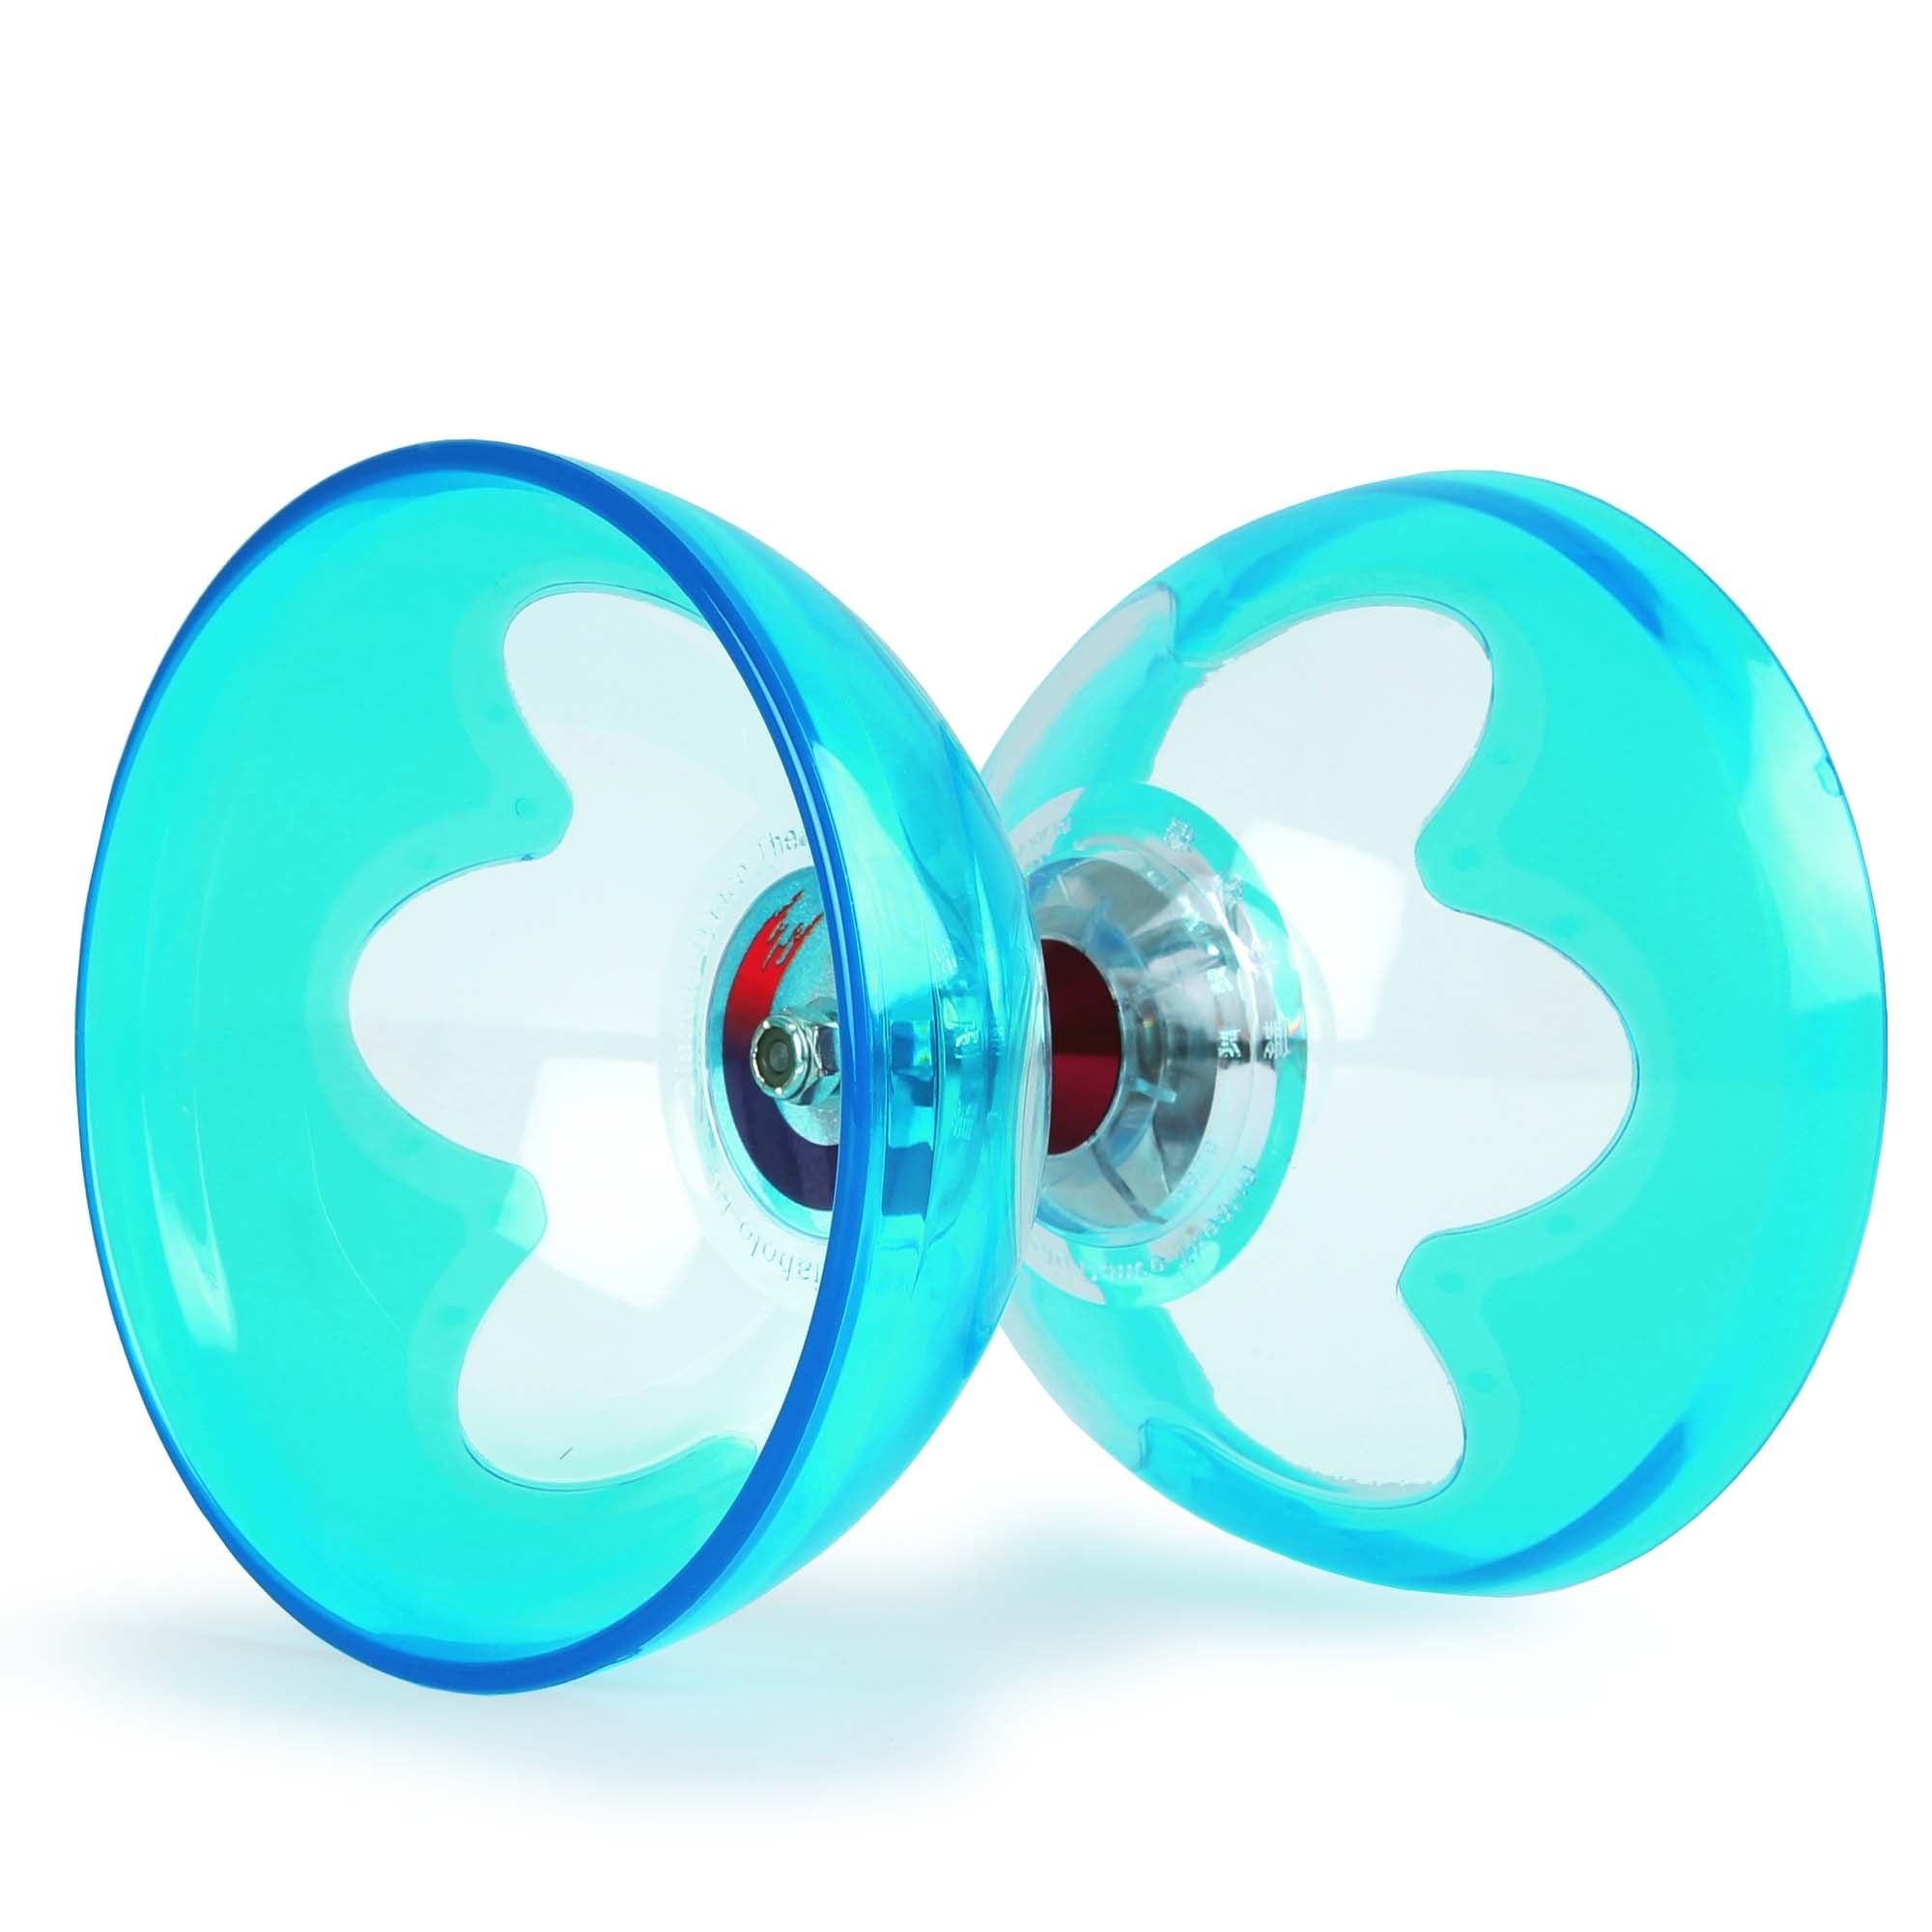 Blue hyperspin diabolo laying on it's side